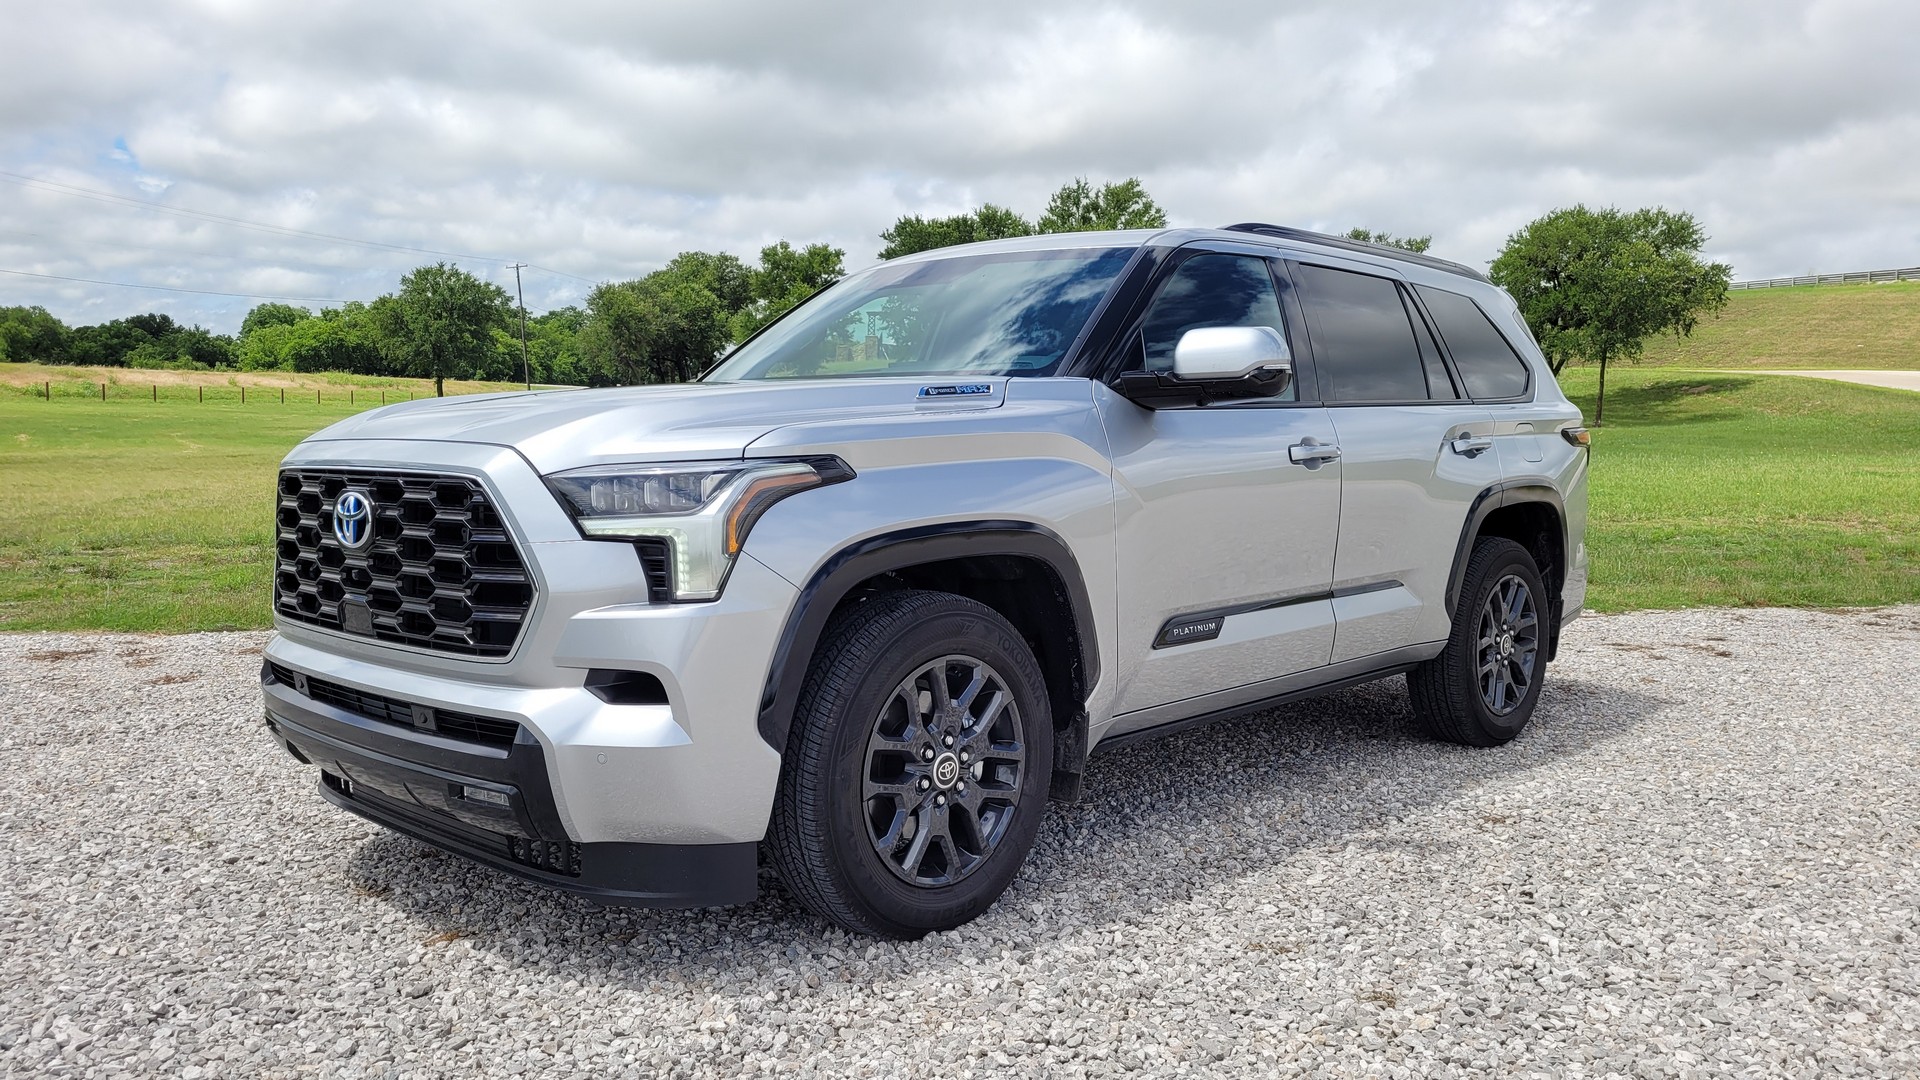 Driven The 2023 Toyota Sequoia Packs 437 Hybrid Ponies And Looks Good Doing It Car News